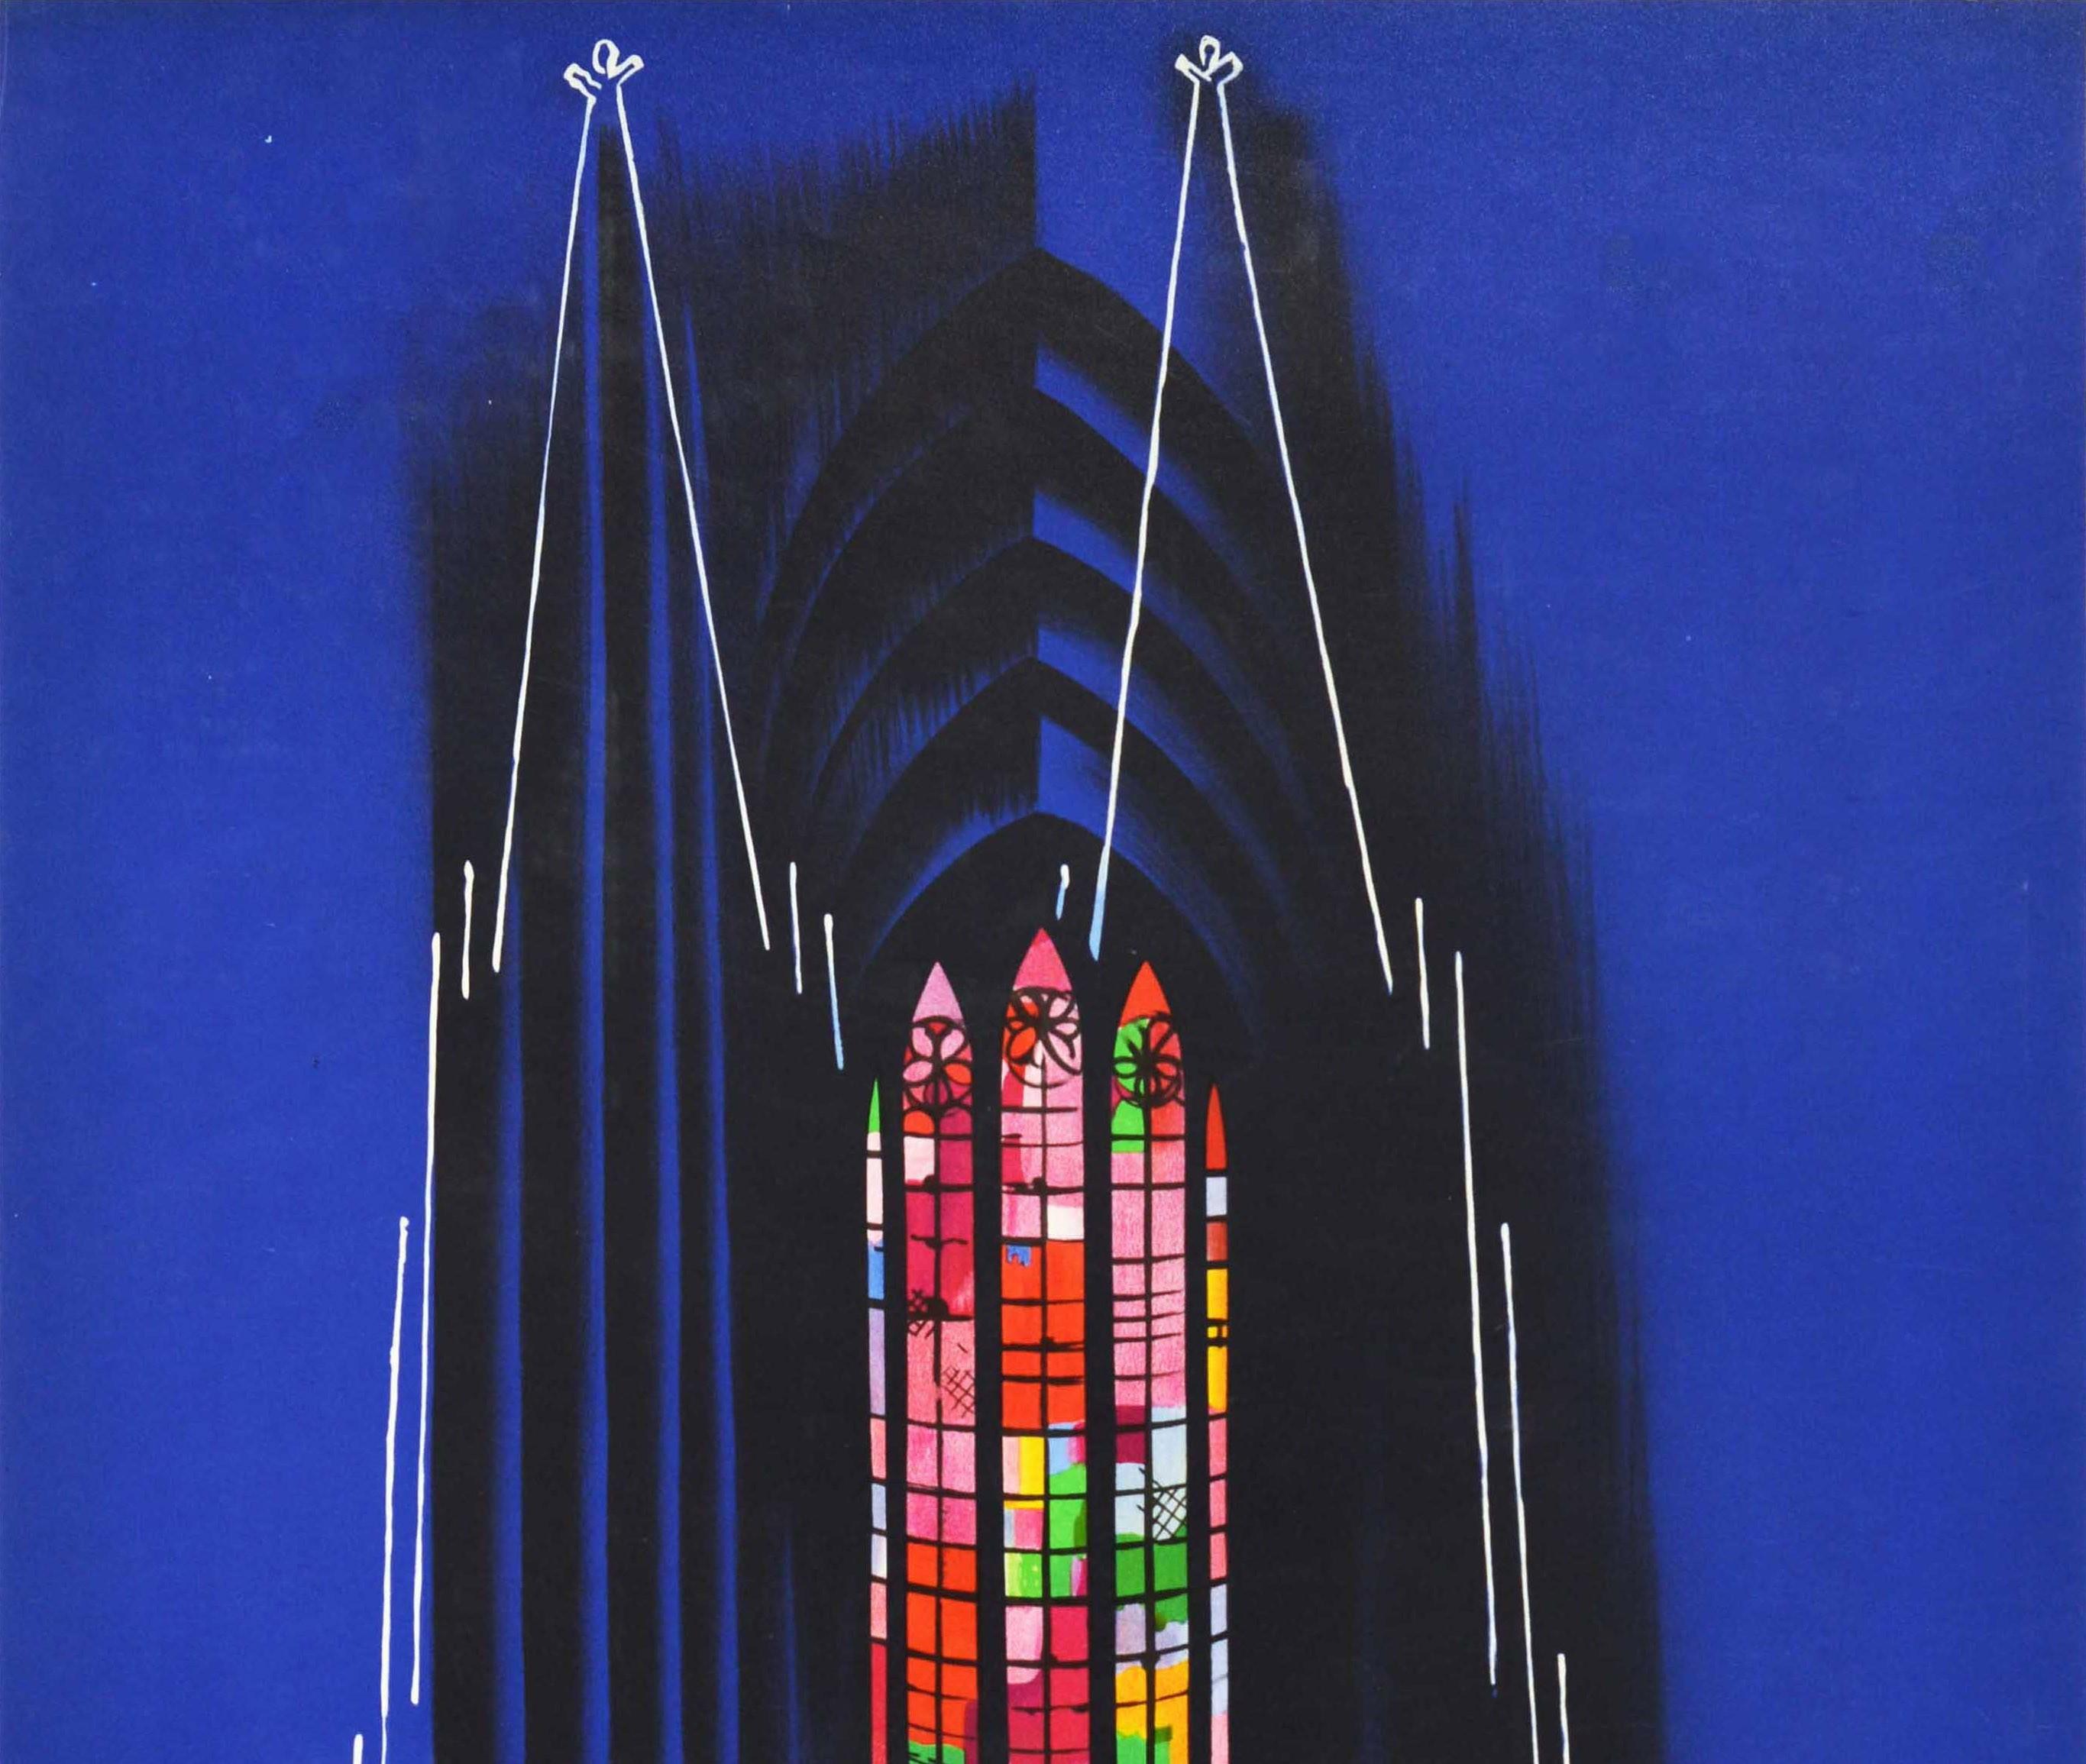 Original vintage travel poster for Koln / Cologne featuring stunning artwork by the German artist Werner Labbe (1909-1989) depicting colourful stained glass windows of the historic Cathedral Church of Saint Peter with the arches and outline set over